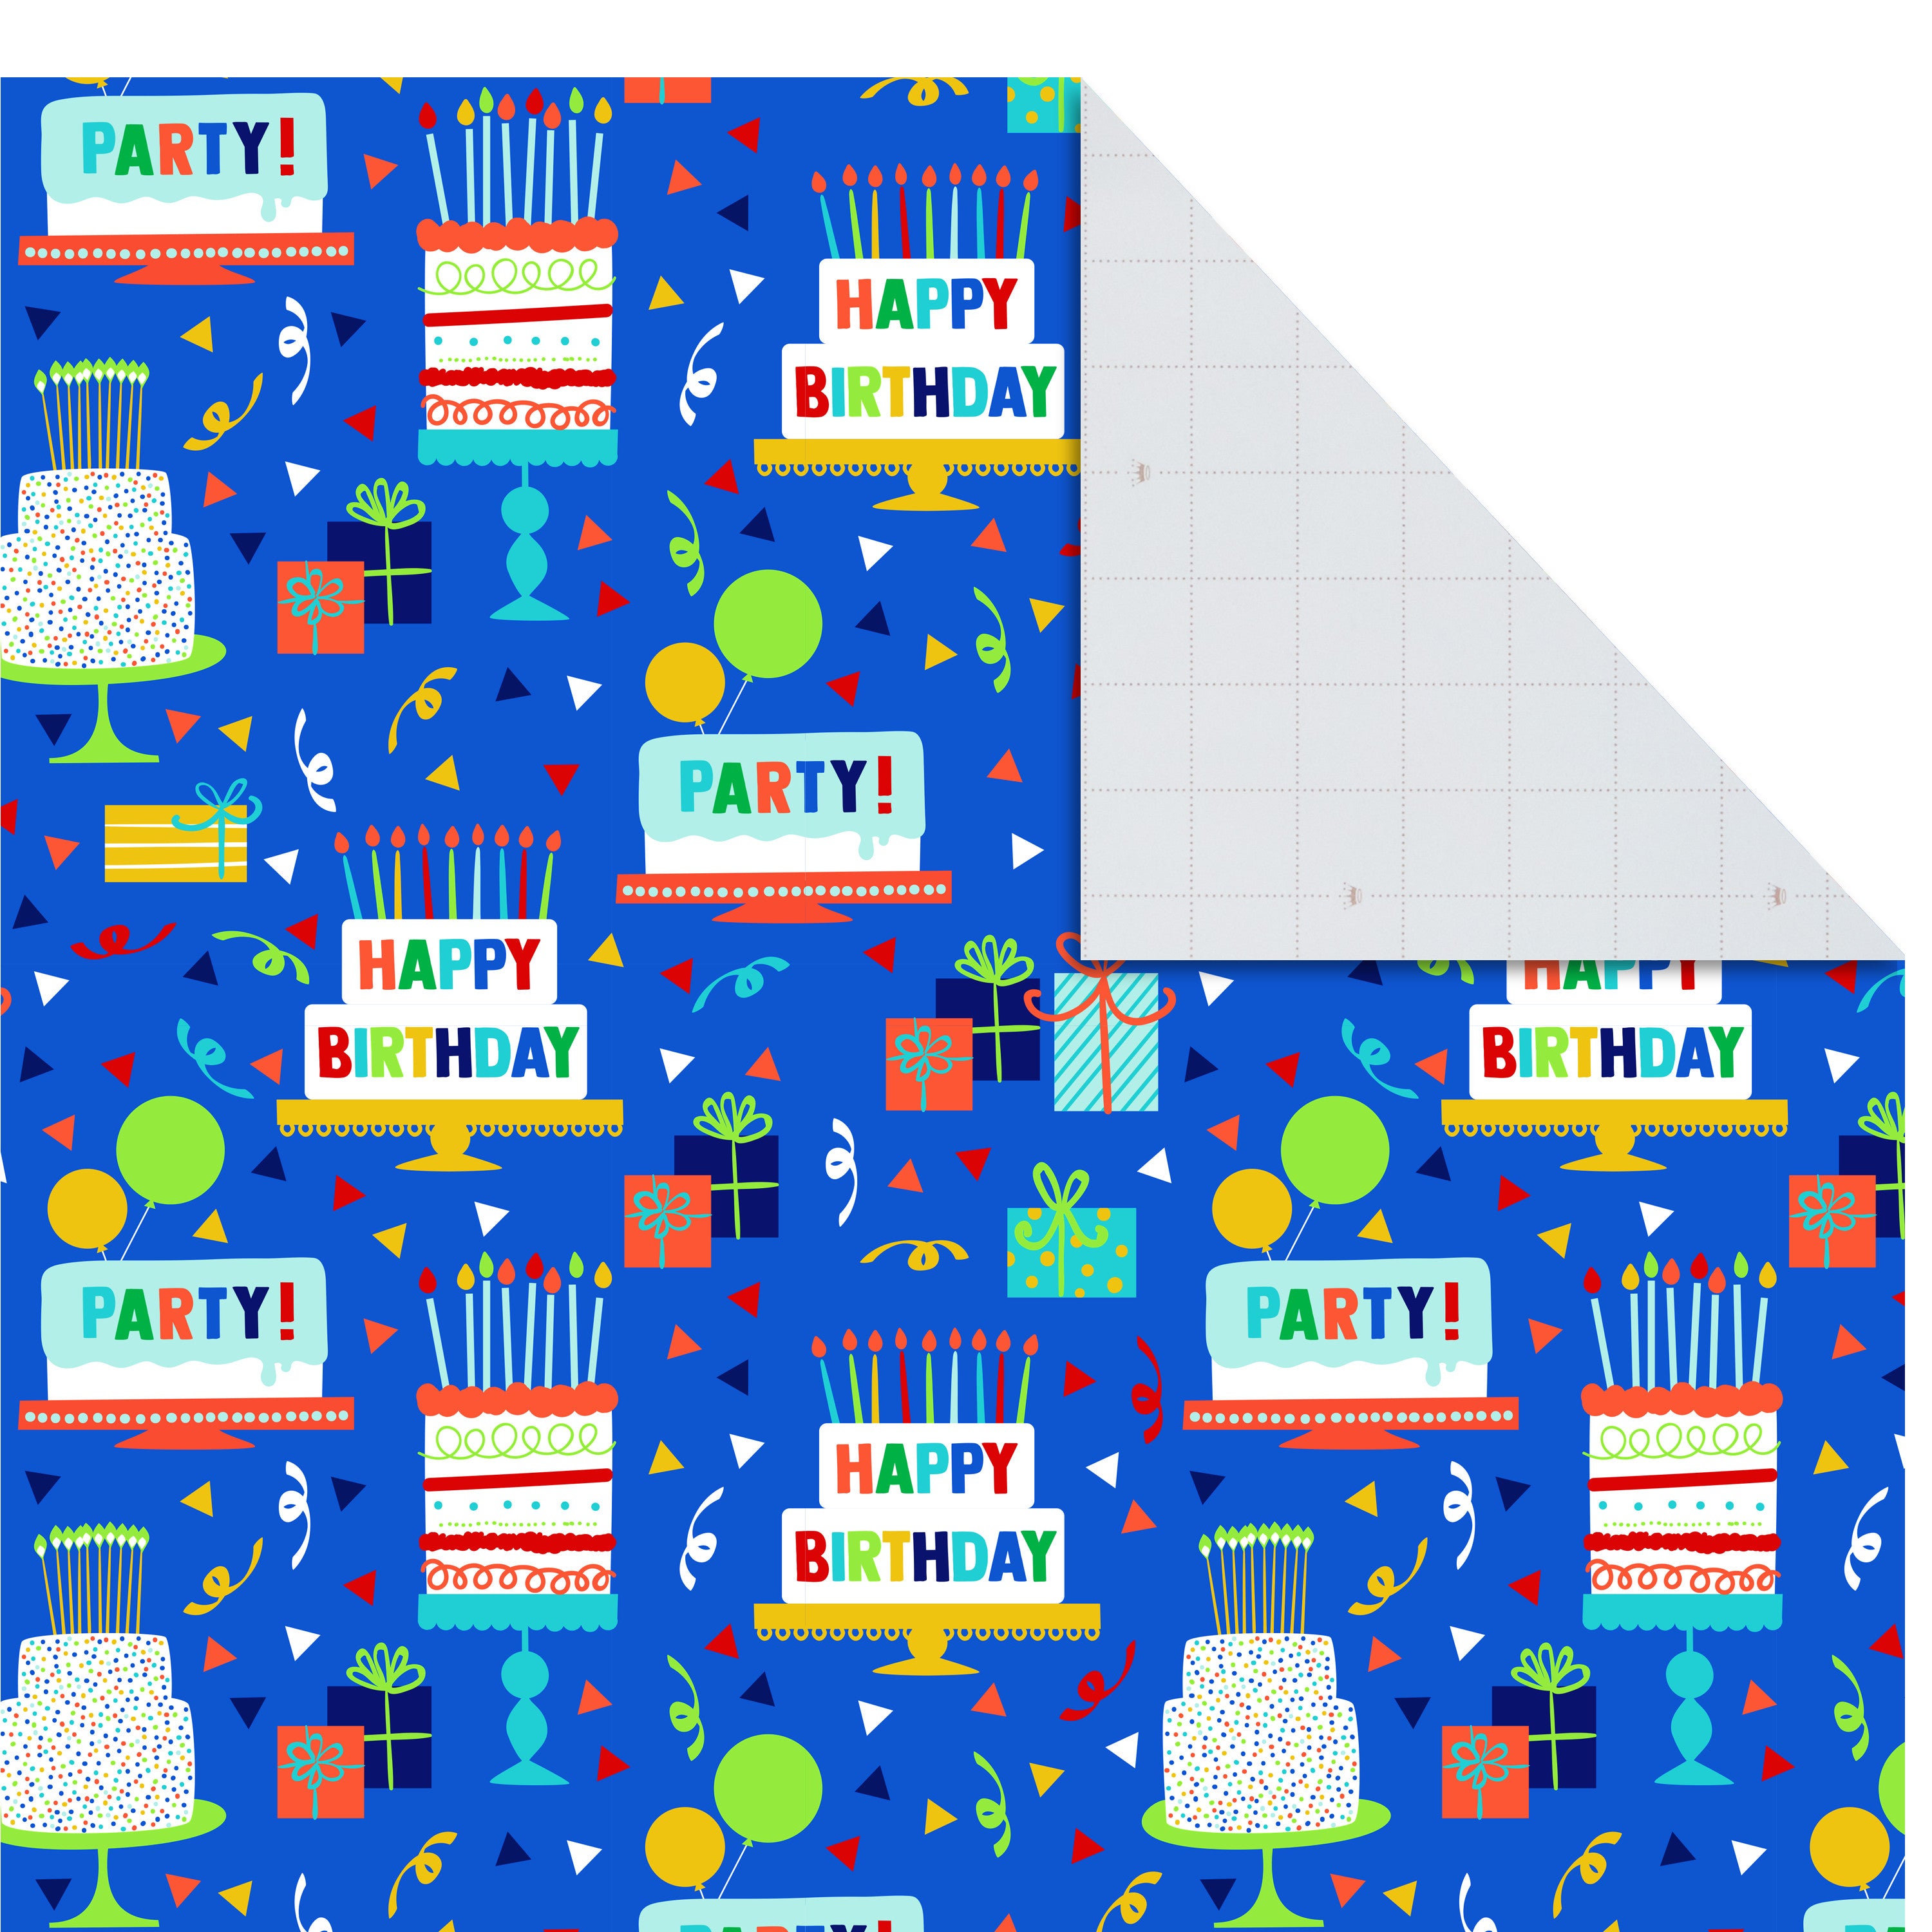 Flat Birthday Wrapping Paper Sheets with Cutlines on Reverse (12 Folded Sheets with Sticker Seals) Happy Birthday, Red Confetti, Blue with Cakes